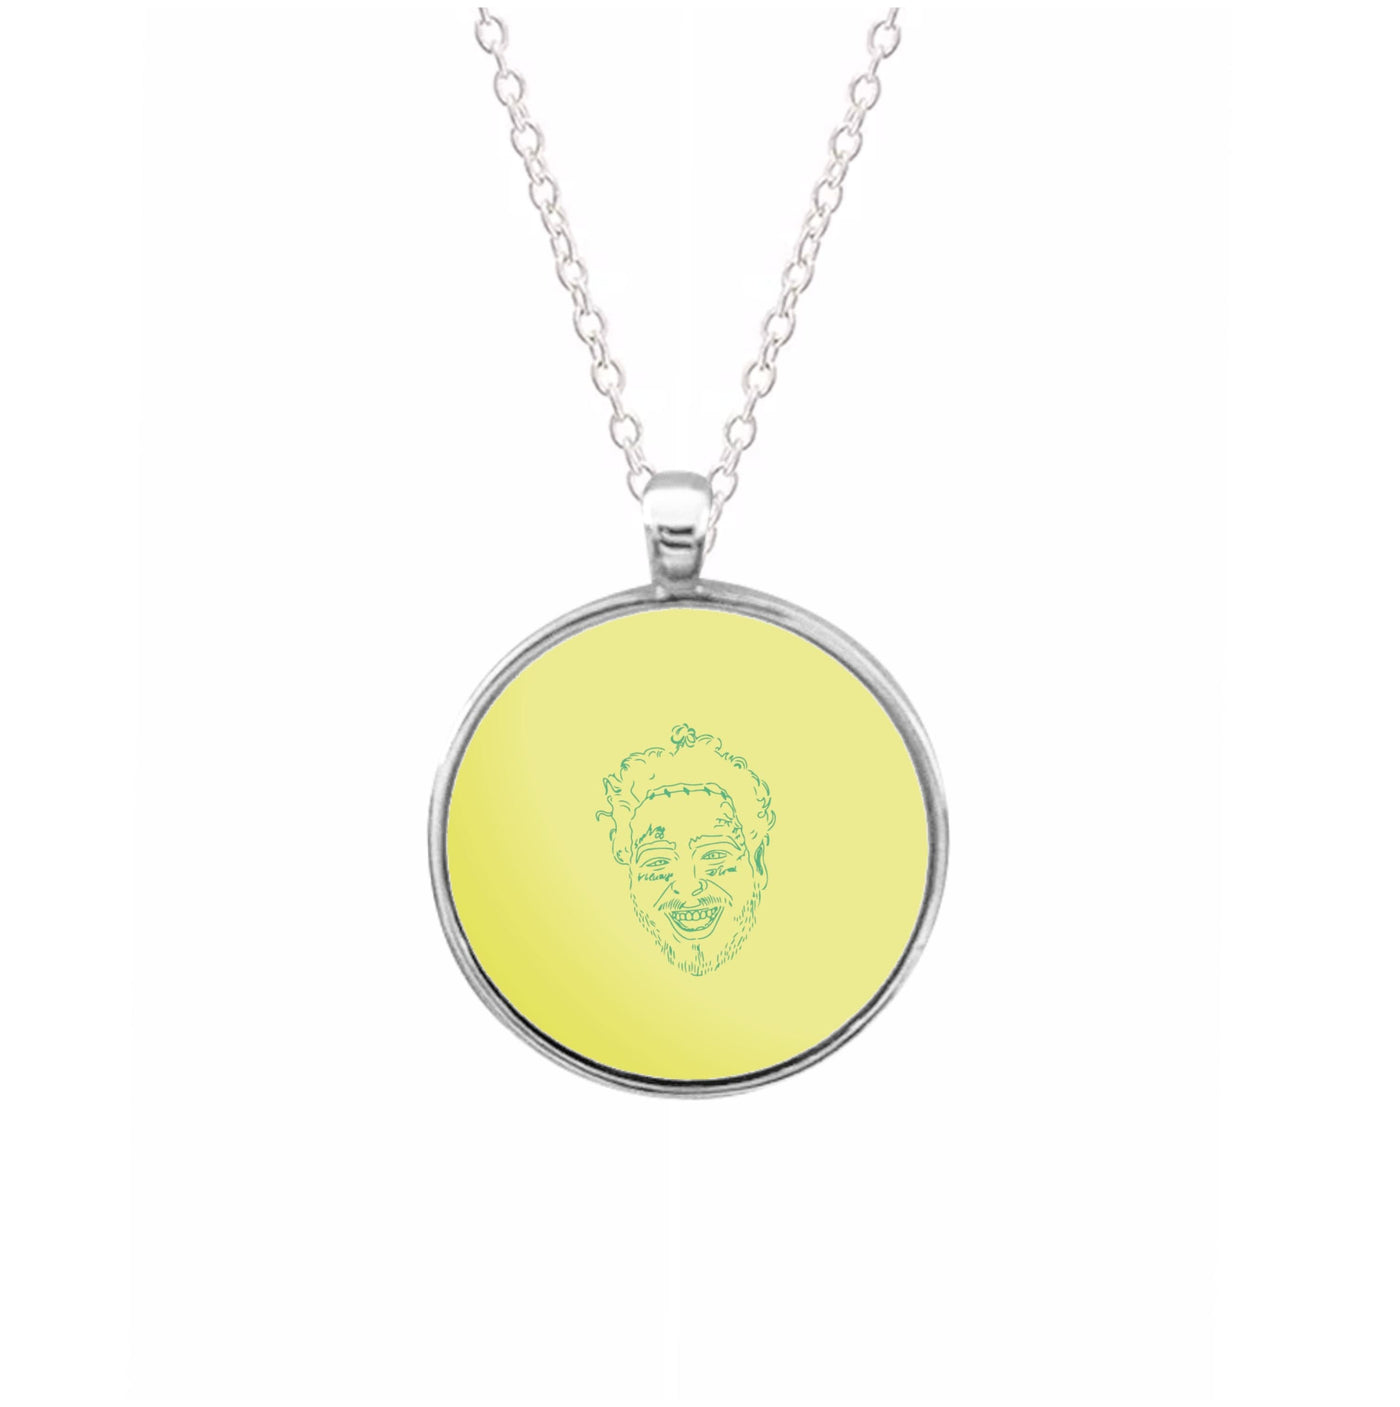 Outline - Post Malone Necklace